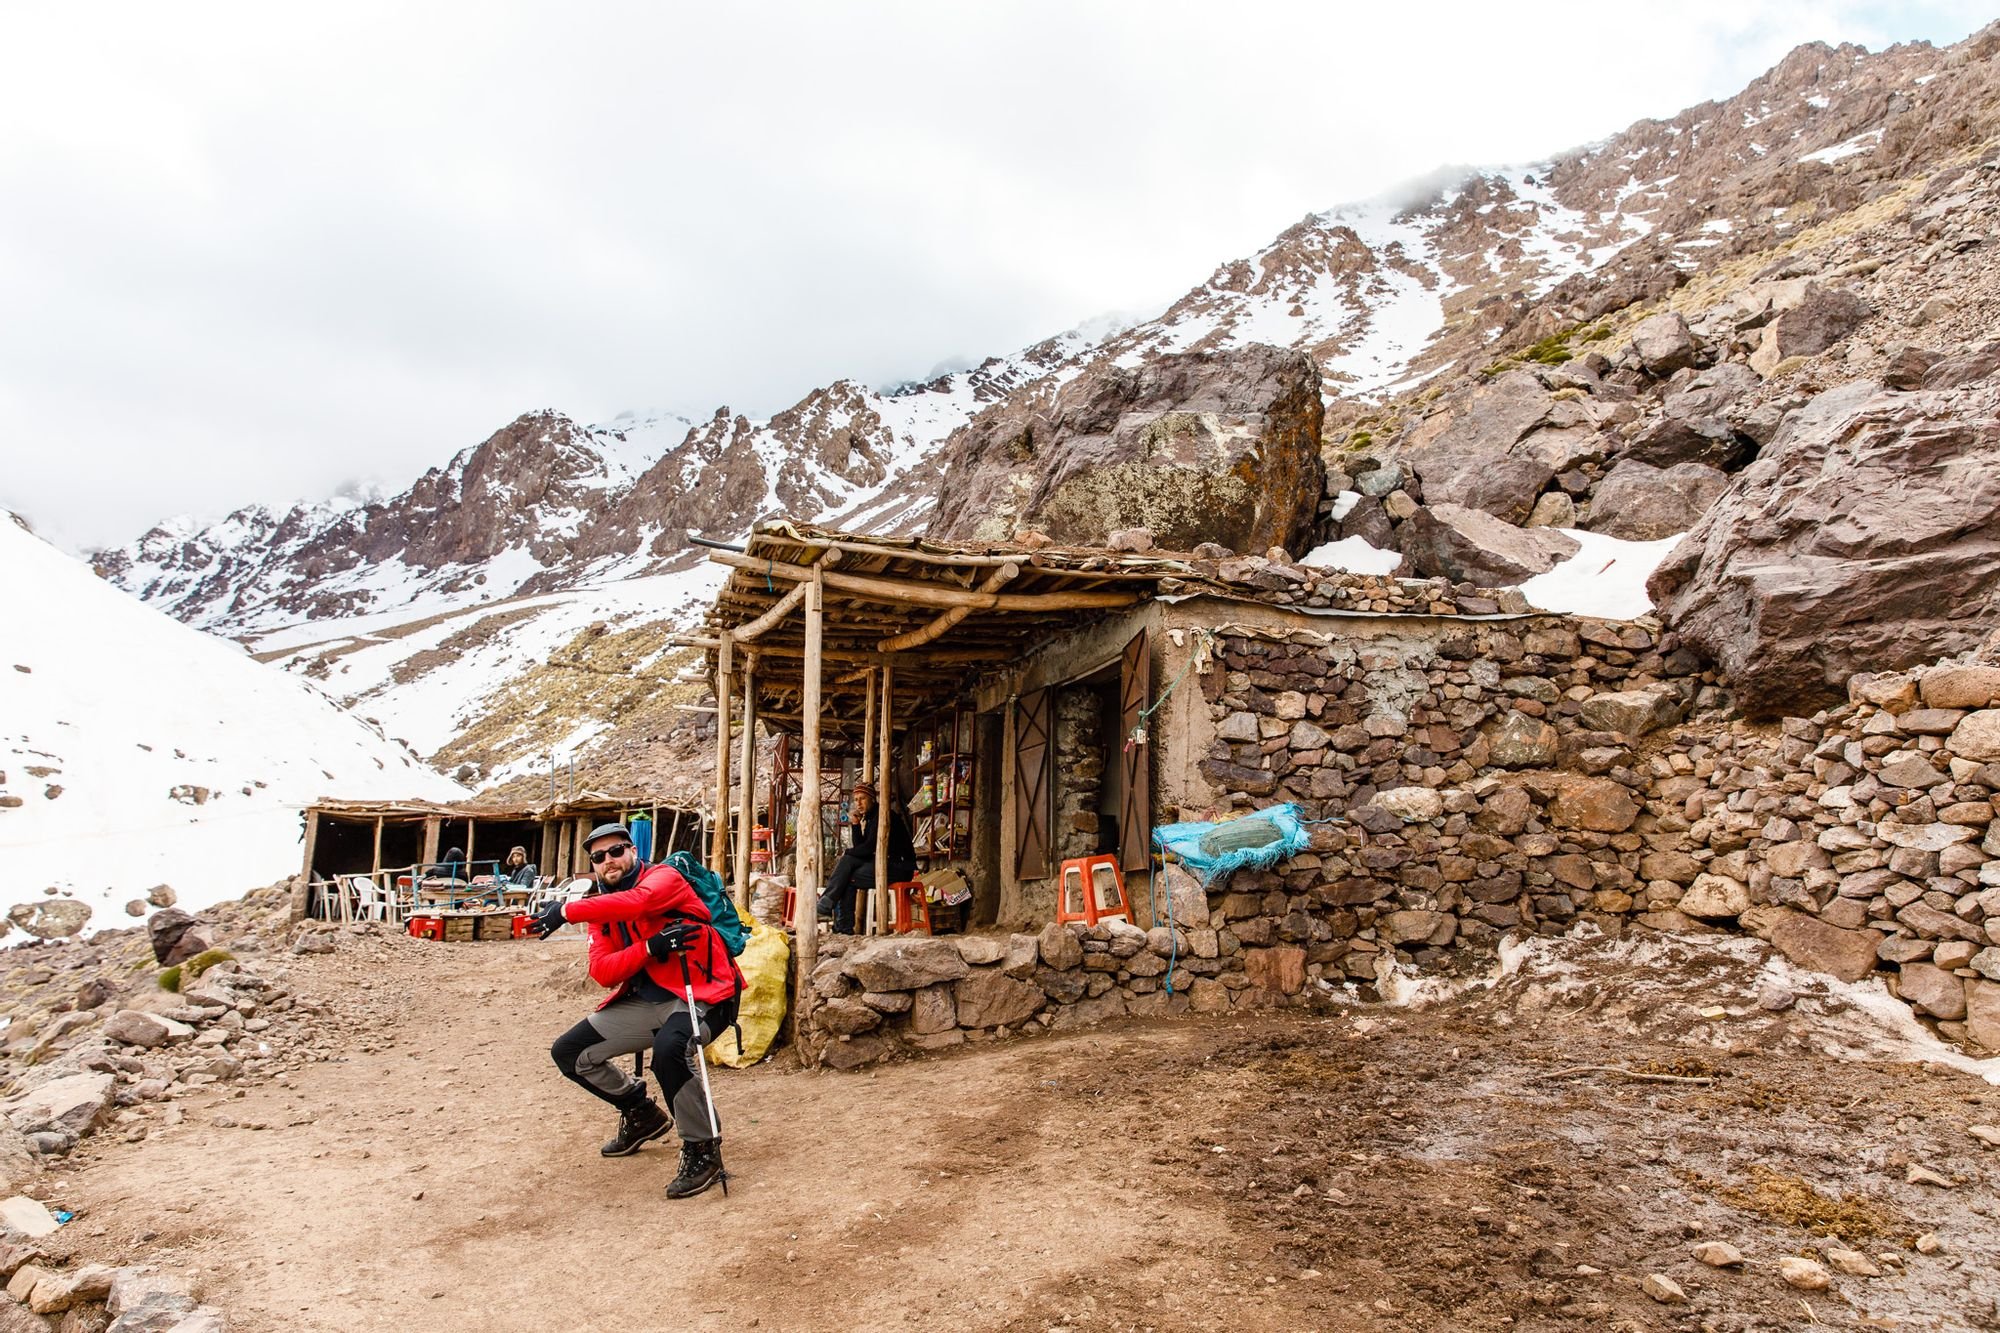 A hiker poses in front of the basecamp at Imlil, on the way up Mount Toubkal.